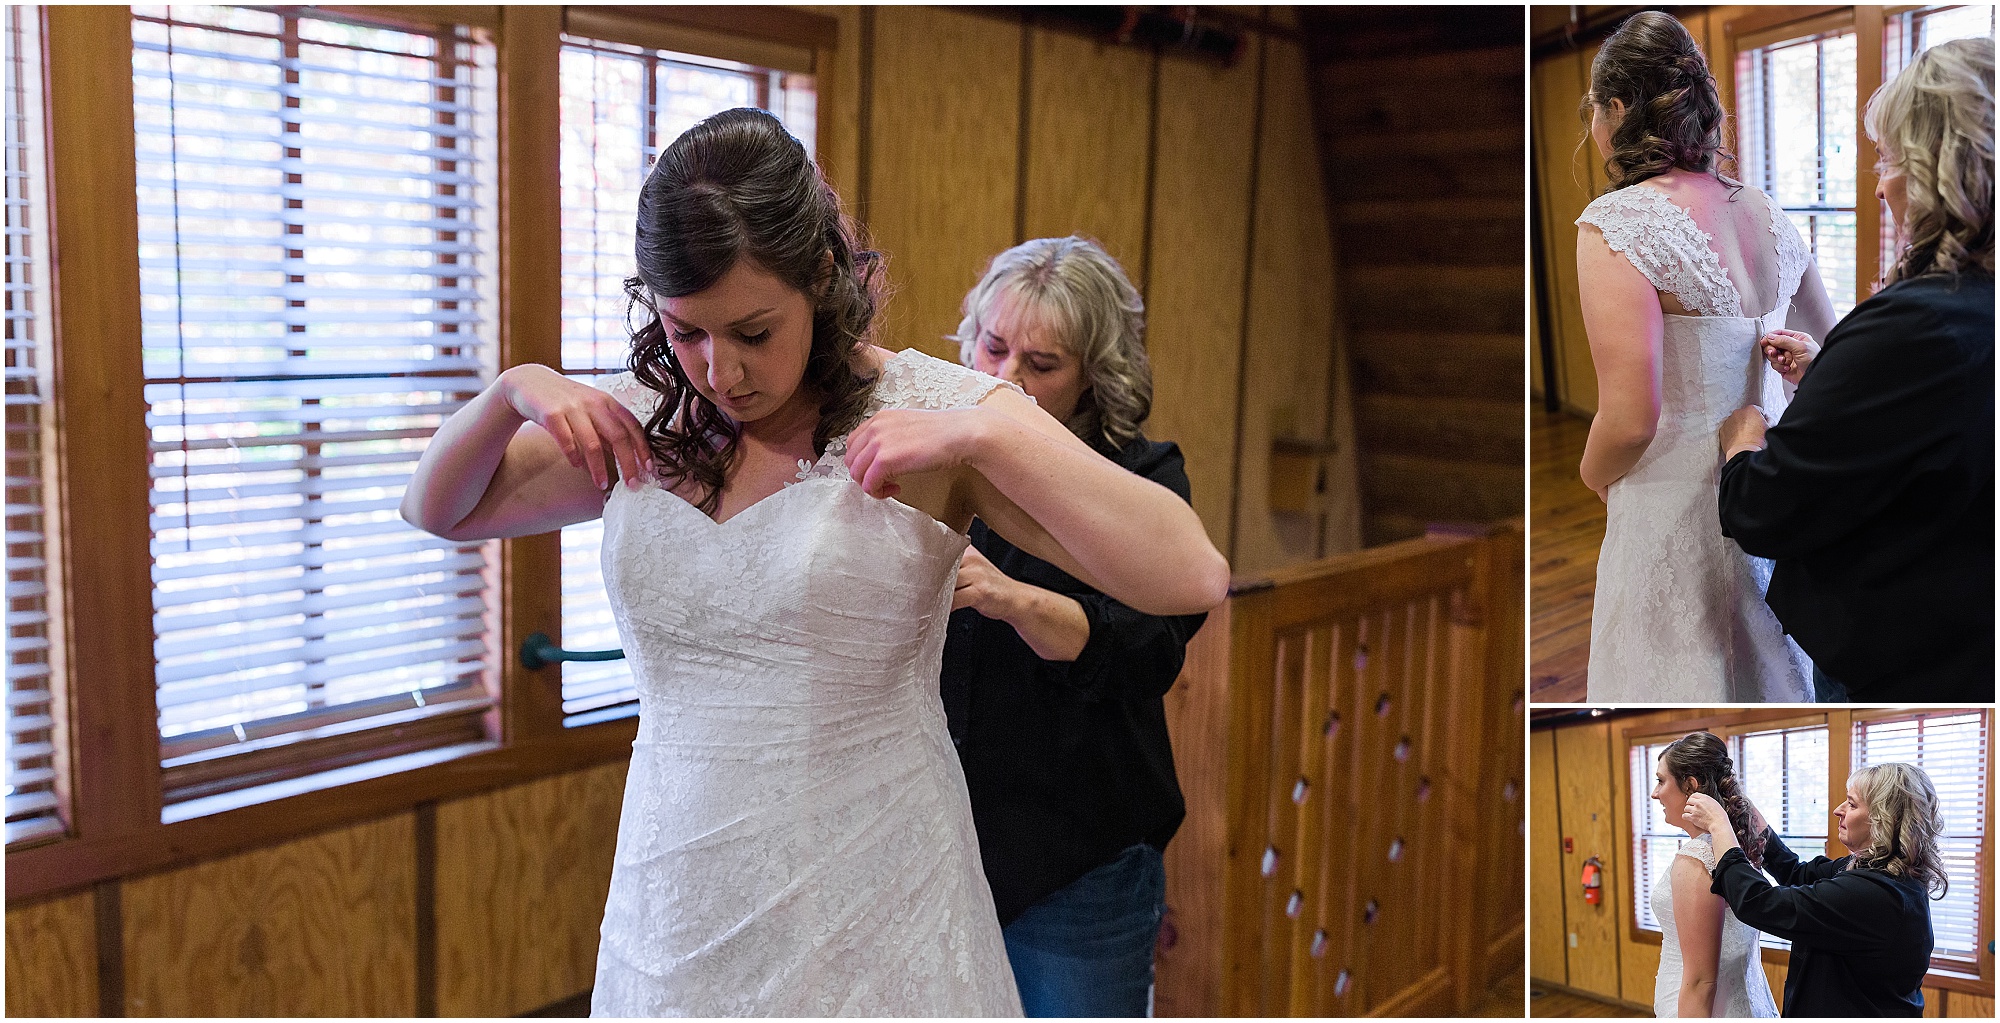 The bride's mother helps her get into her David's Bridal wedding gown upstairs of the Hollinshead Barn Fall wedding venue in Bend, OR. | Erica Swantek Photography